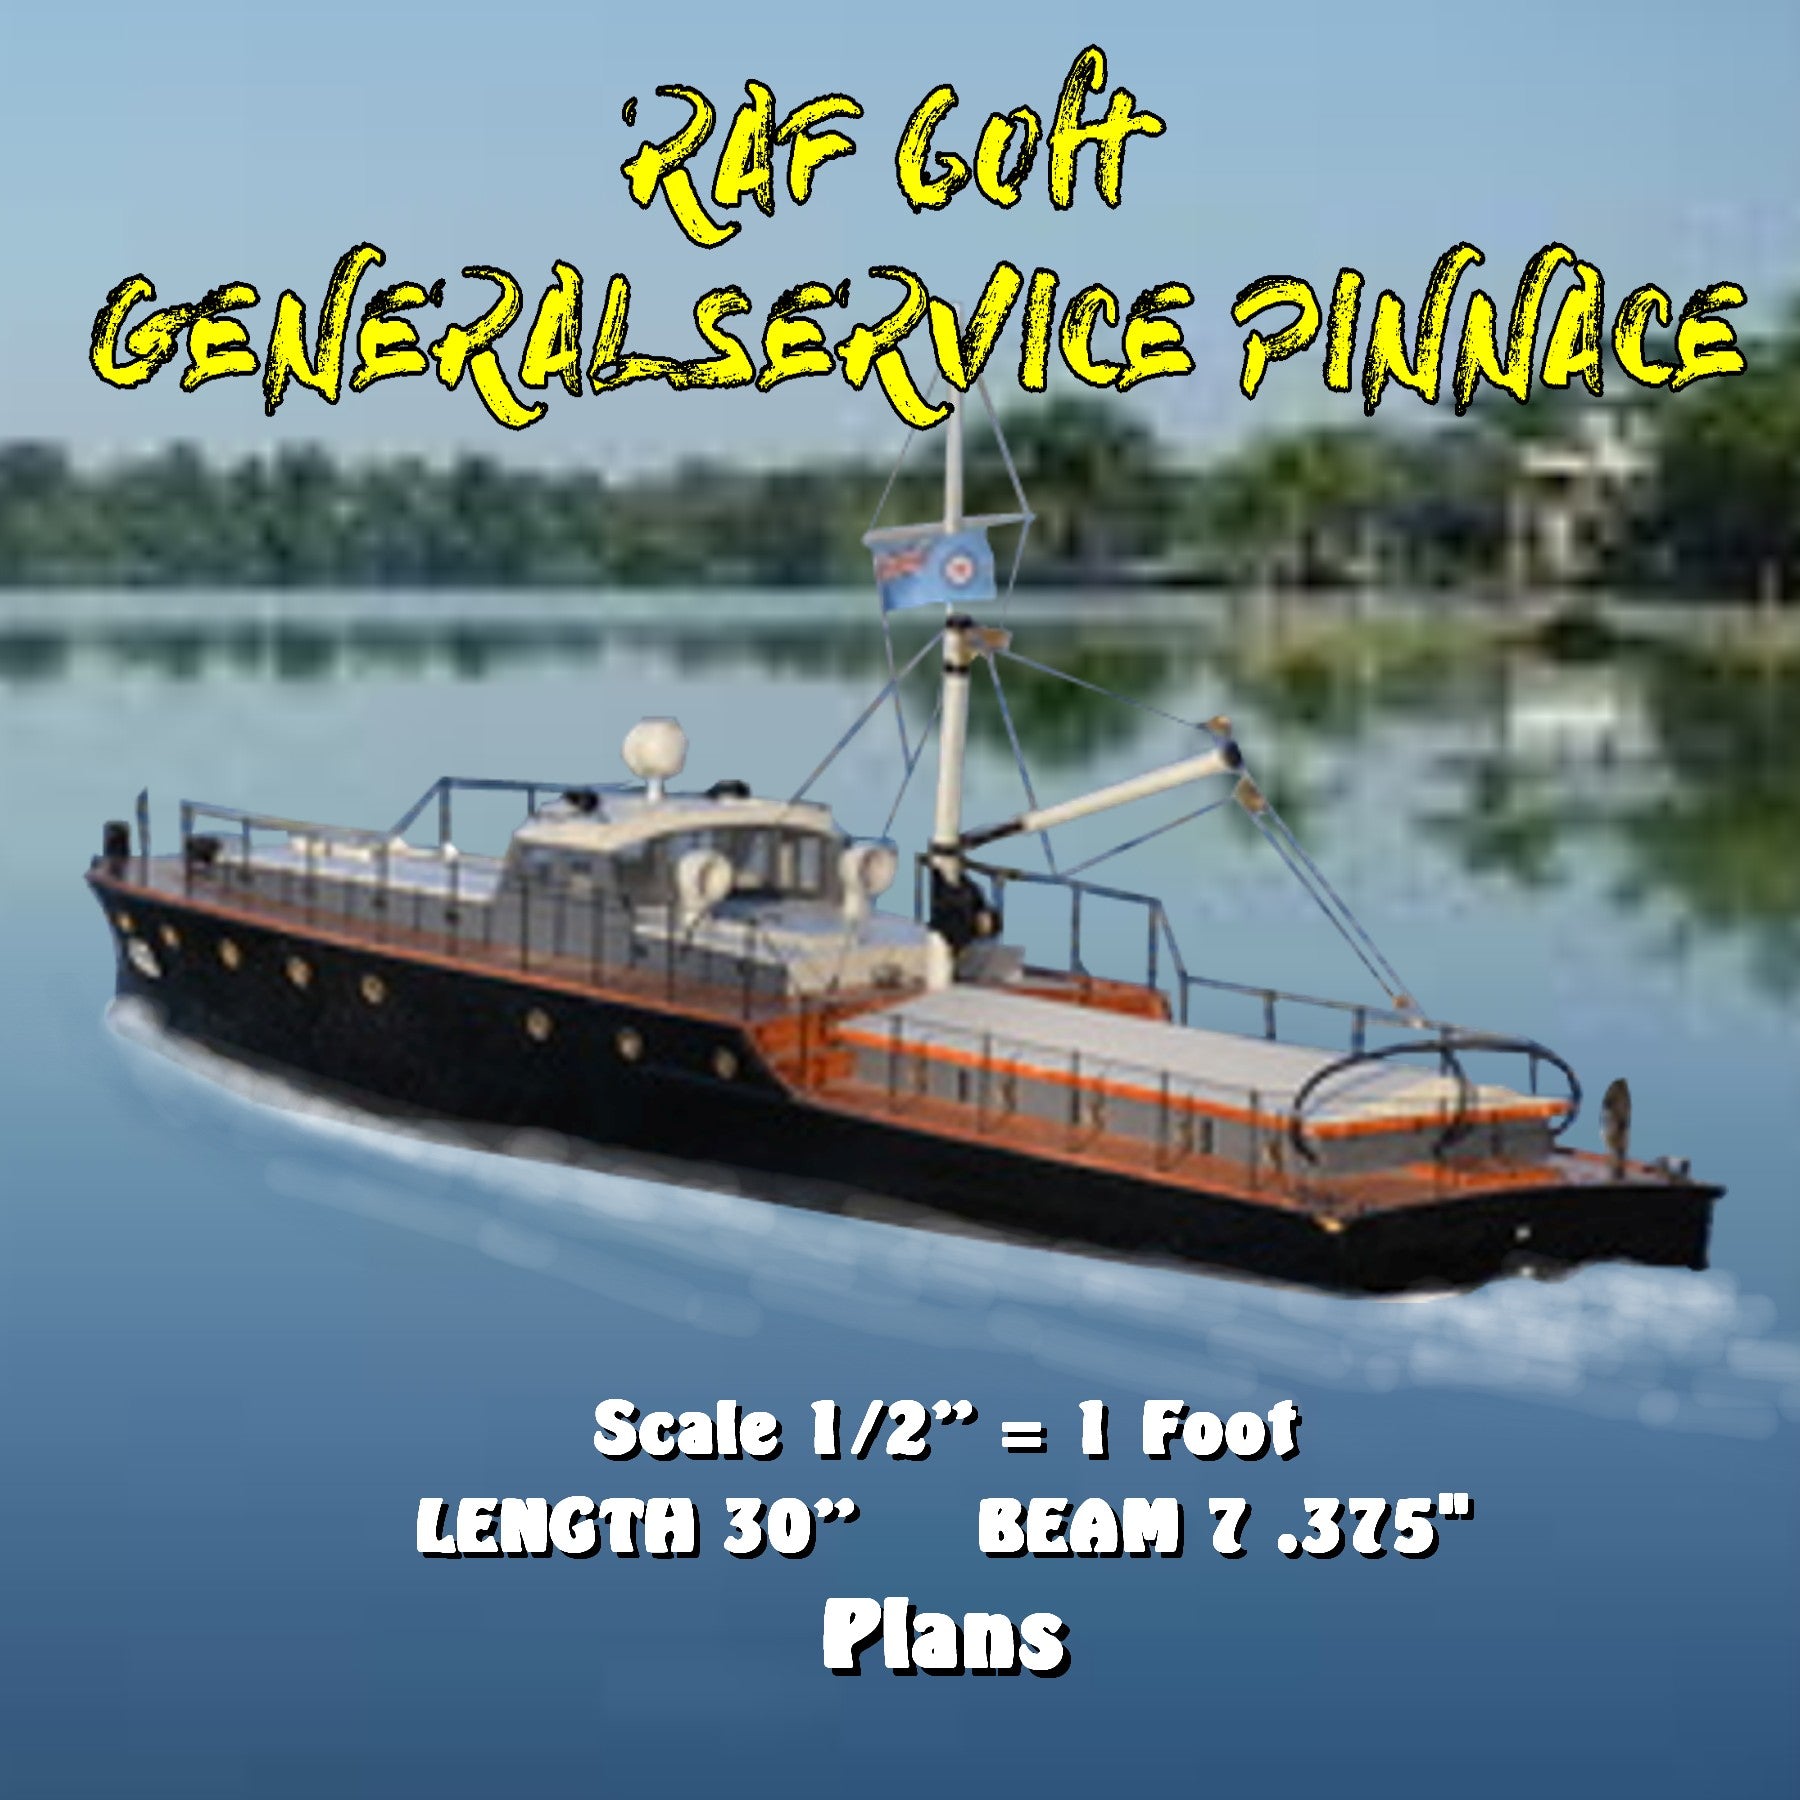 full size printed plans 60ft  general service pinnace scale 1/2” = 1 foot  l30”  b7 .375"  suitable for radio control